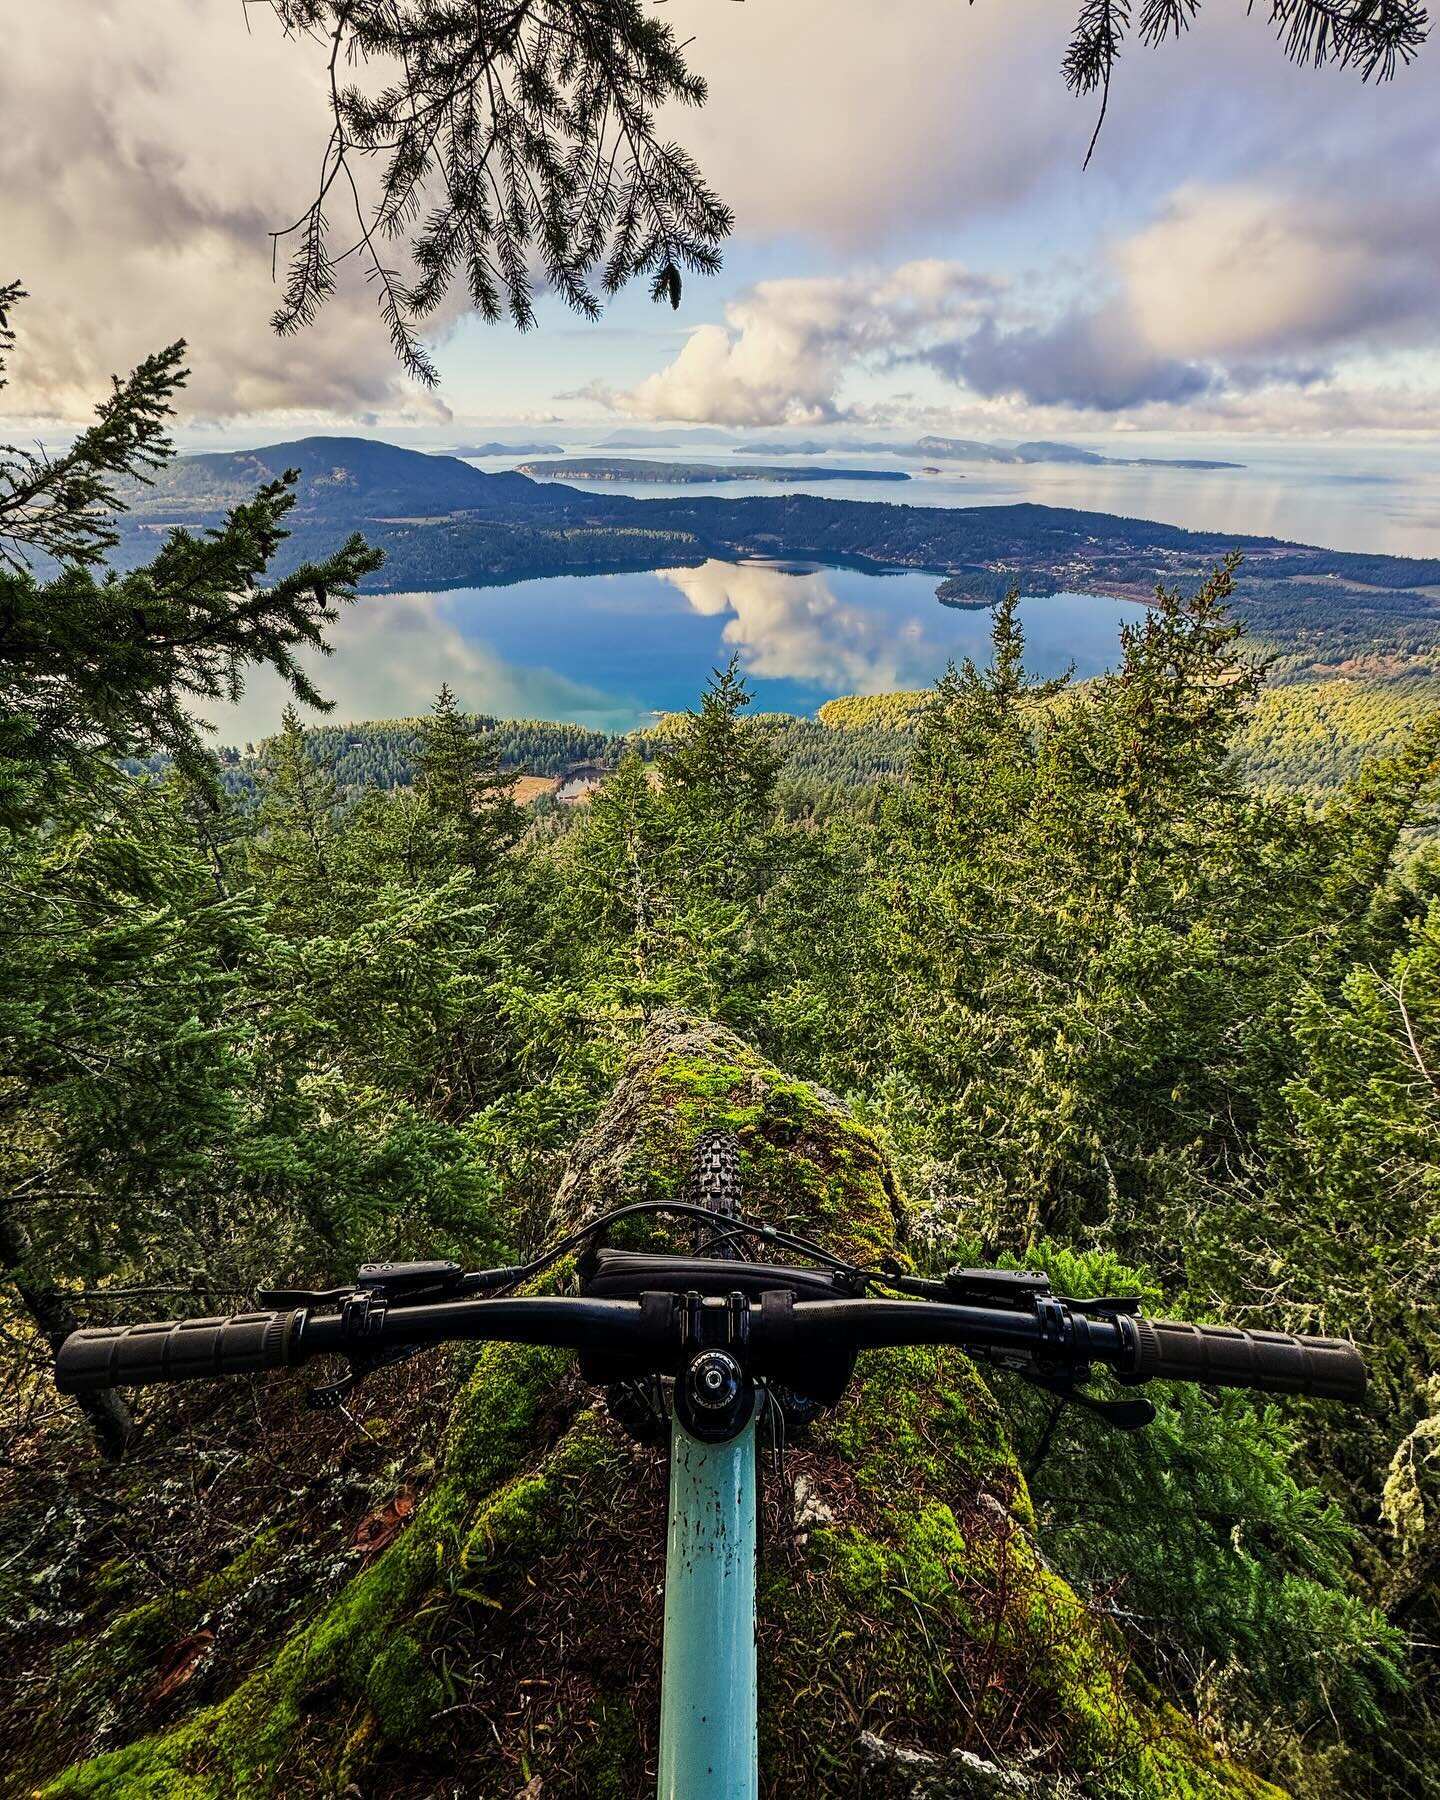 It&rsquo;s the weekend 🙌 While I won&rsquo;t be getting out in the PNW to ride this weekend, I will certainly find my way onto a bike and into the forest 🌳🚵

So, here&rsquo;s to finding your own path and enjoying the simple pleasures of life. Have